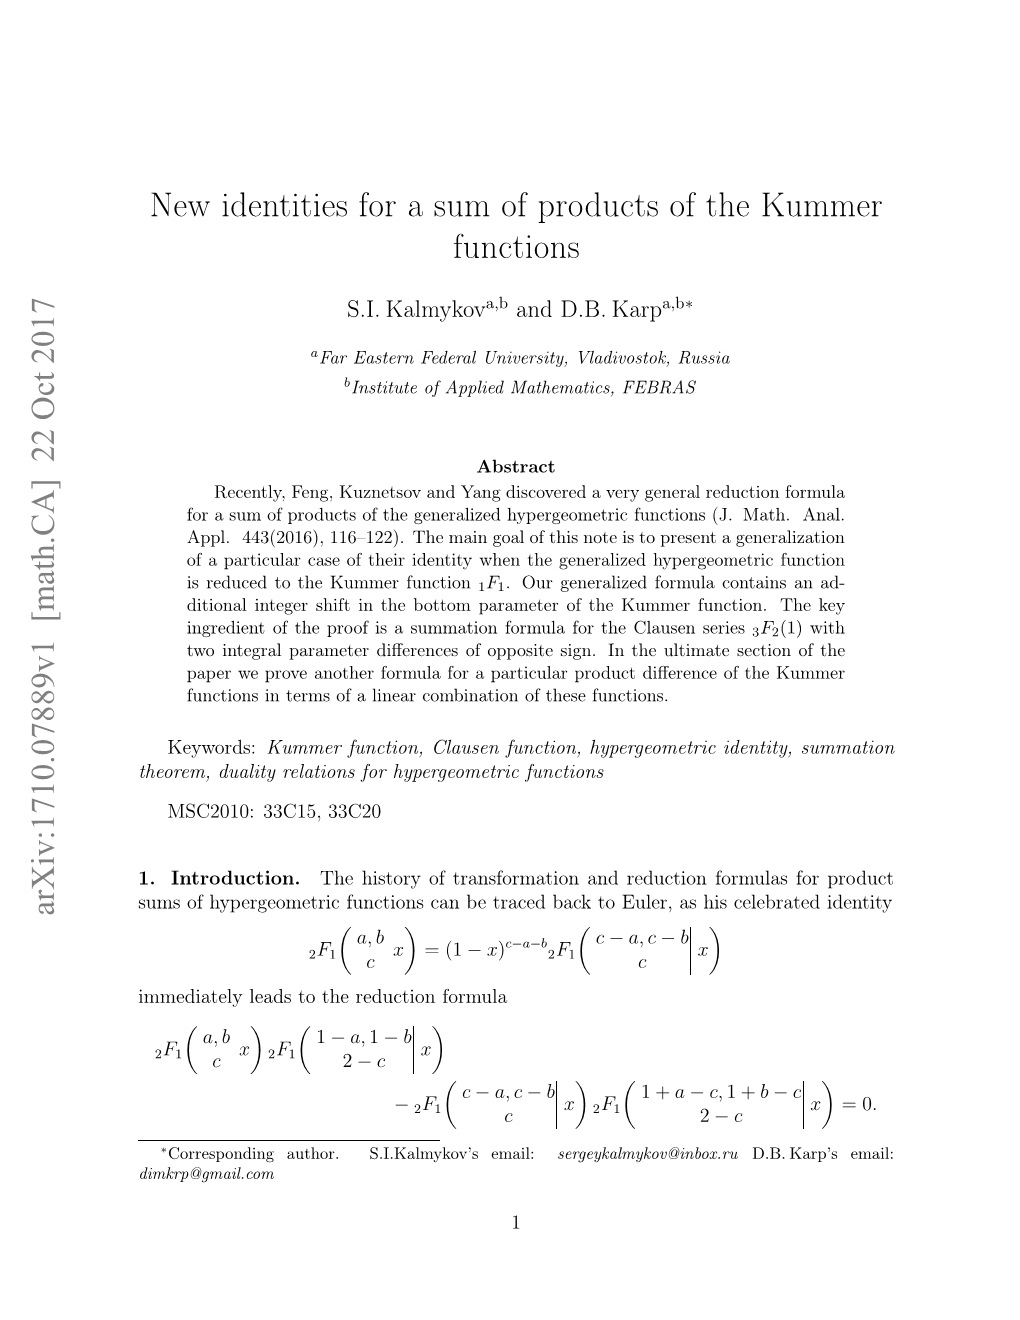 New Identities for a Sum of Products of the Kummer Functions